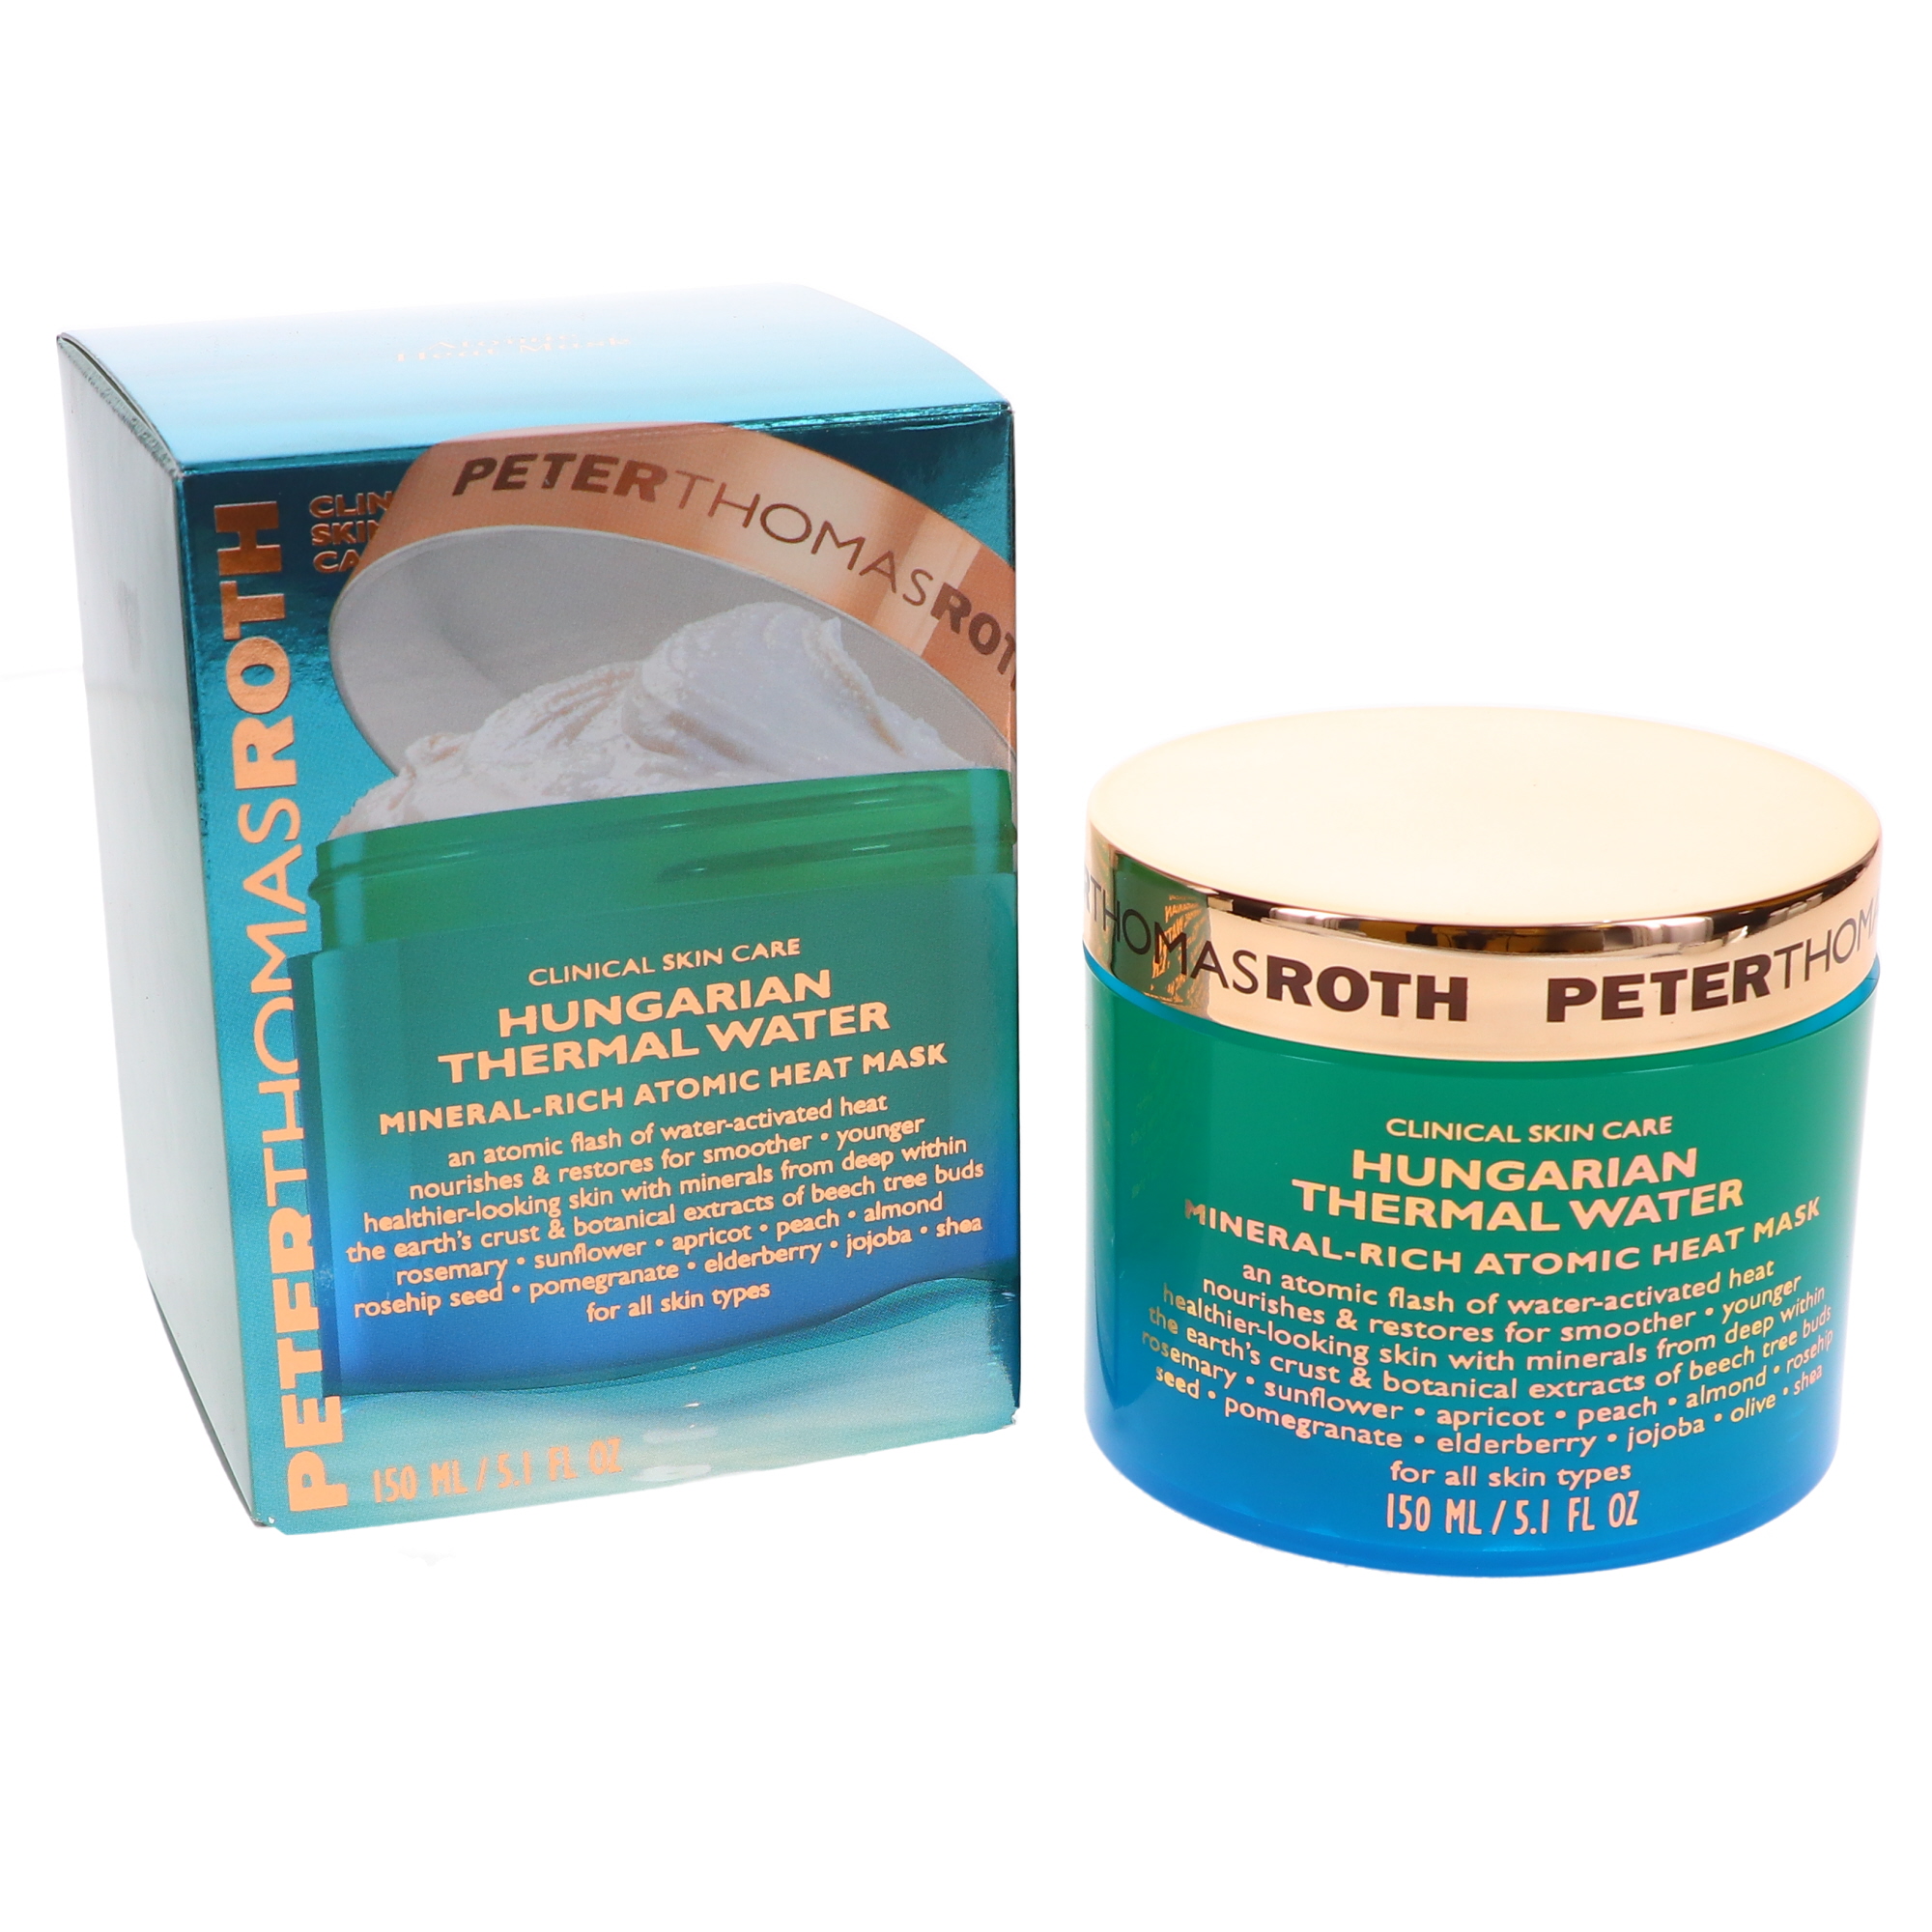 Peter Thomas Roth Hungarian Thermal Water Mineral Rich Atomic Heat Mask 5.1 oz - image 7 of 8